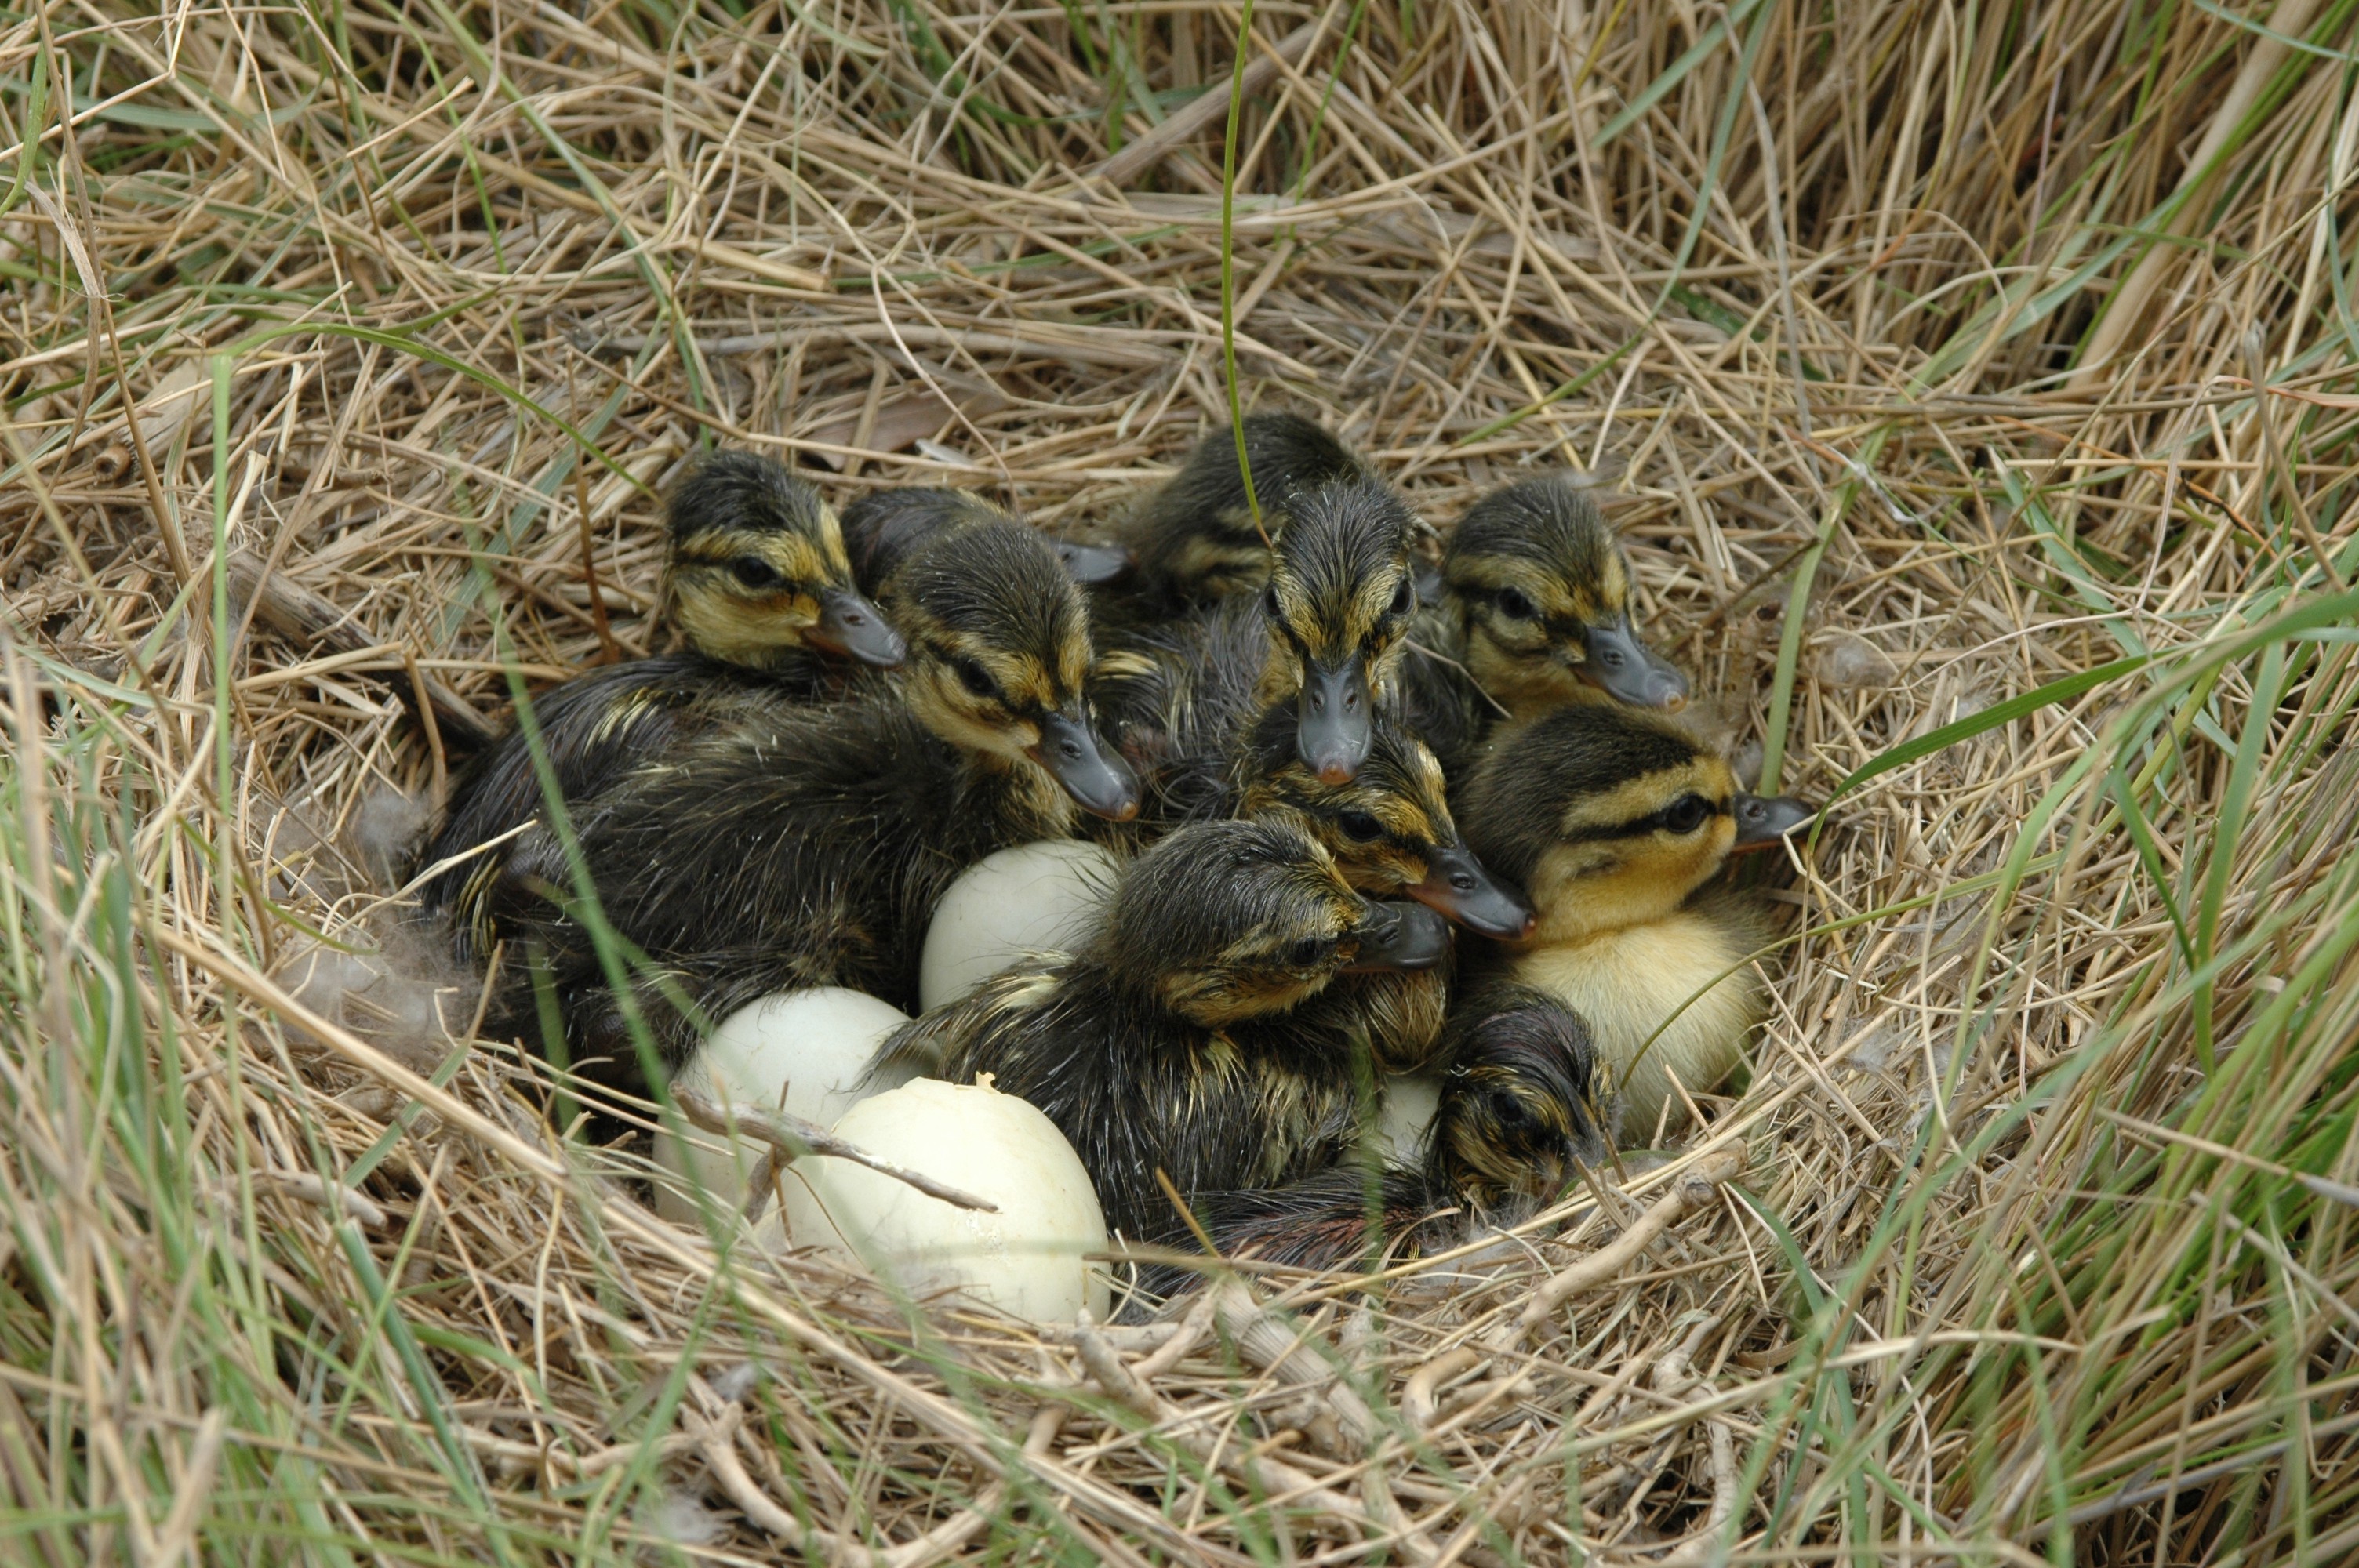 A nest of black duck chicks and eggs huddled together